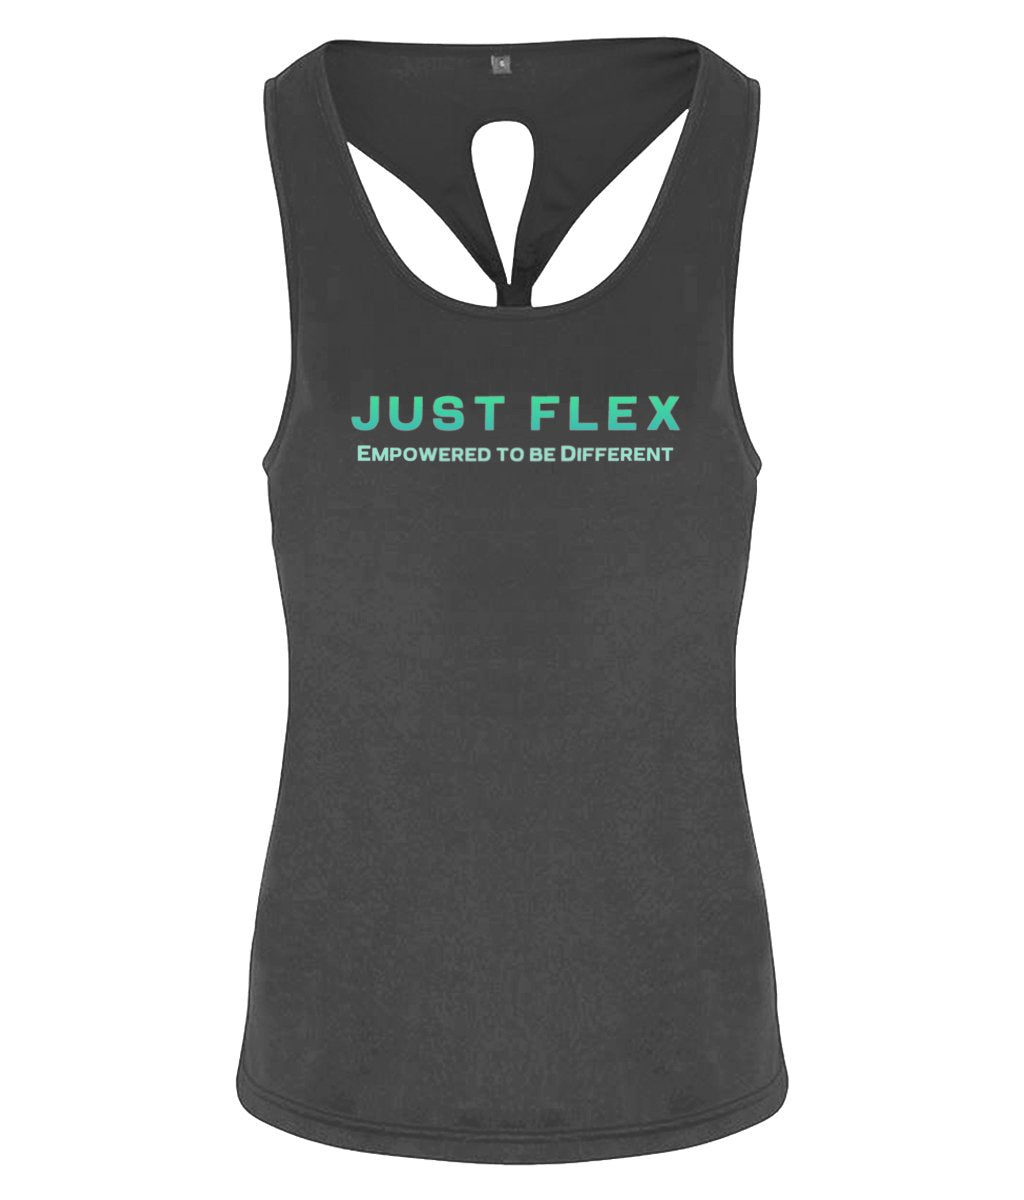 Just Flex - Empowered To Be Different Women's TriDri® Yoga Knot Vest